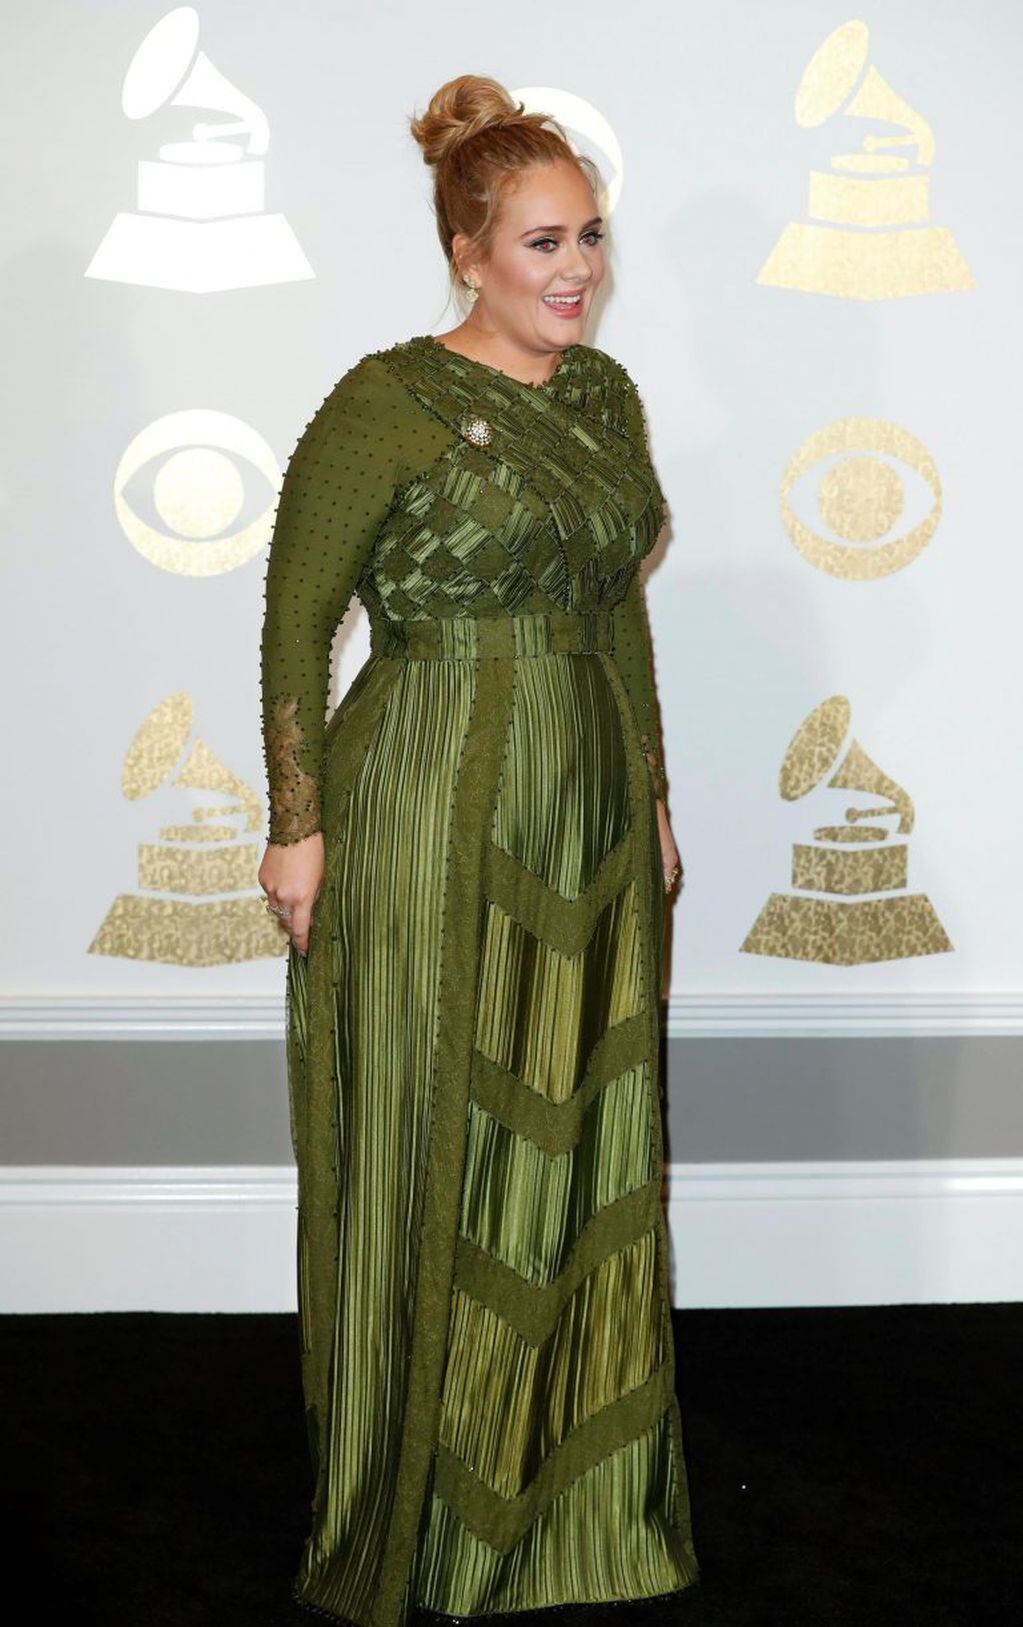 JGM170. Los Angeles (United States), 13/02/2017.- Adele in the press room during the 59th annual Grammy Awards ceremony at the Staples Center in Los Angeles, California, USA, 12 February 2017. Adele won the awards Record Of The Year, Album Of The Year, So